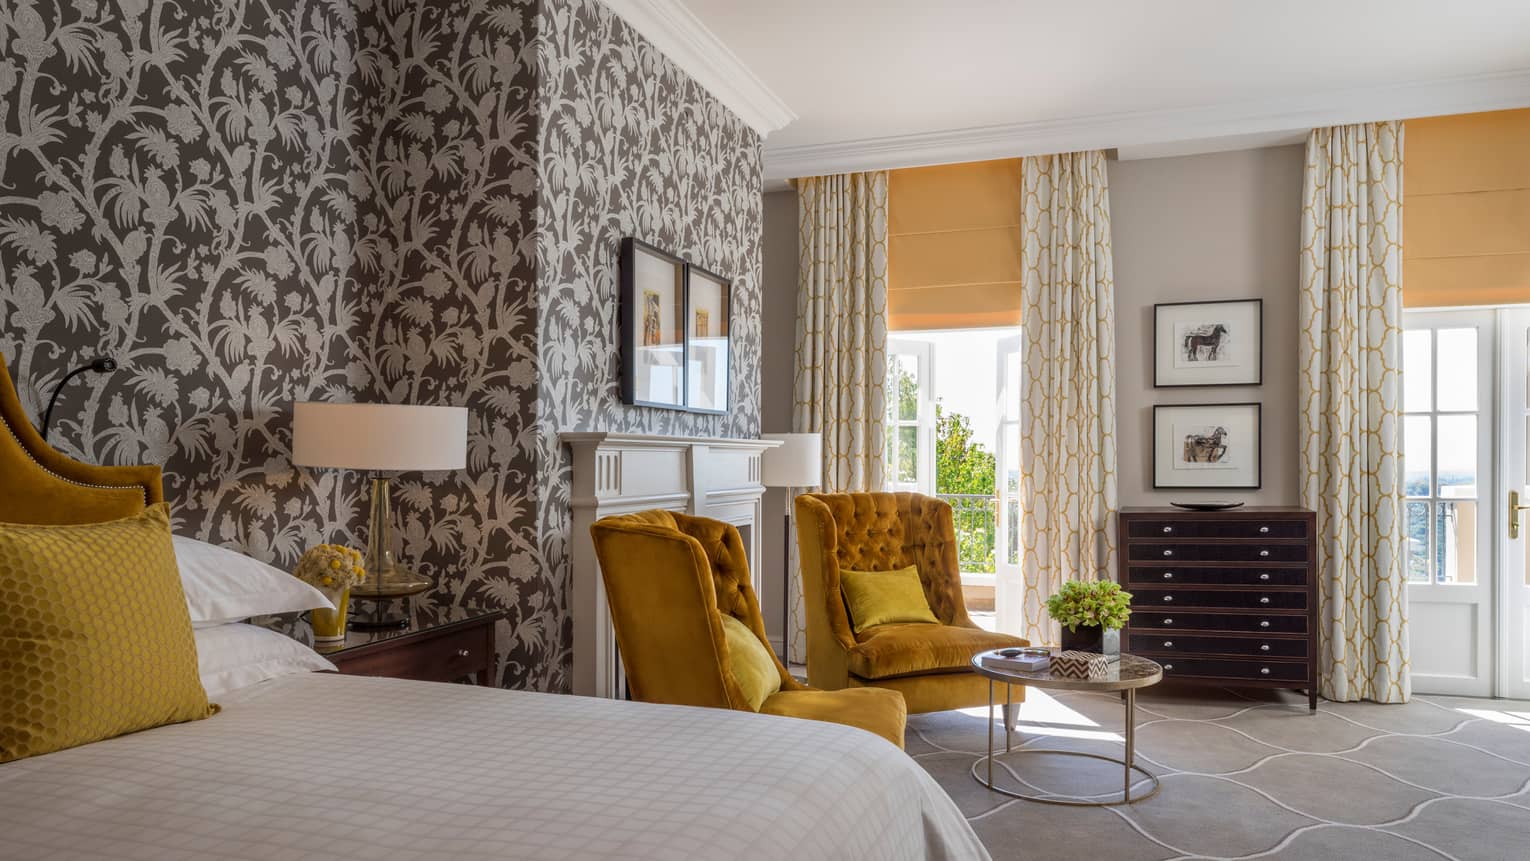 Royal Suite bed, two gold tufted armchairs around small glass table, tropical wallpaper 